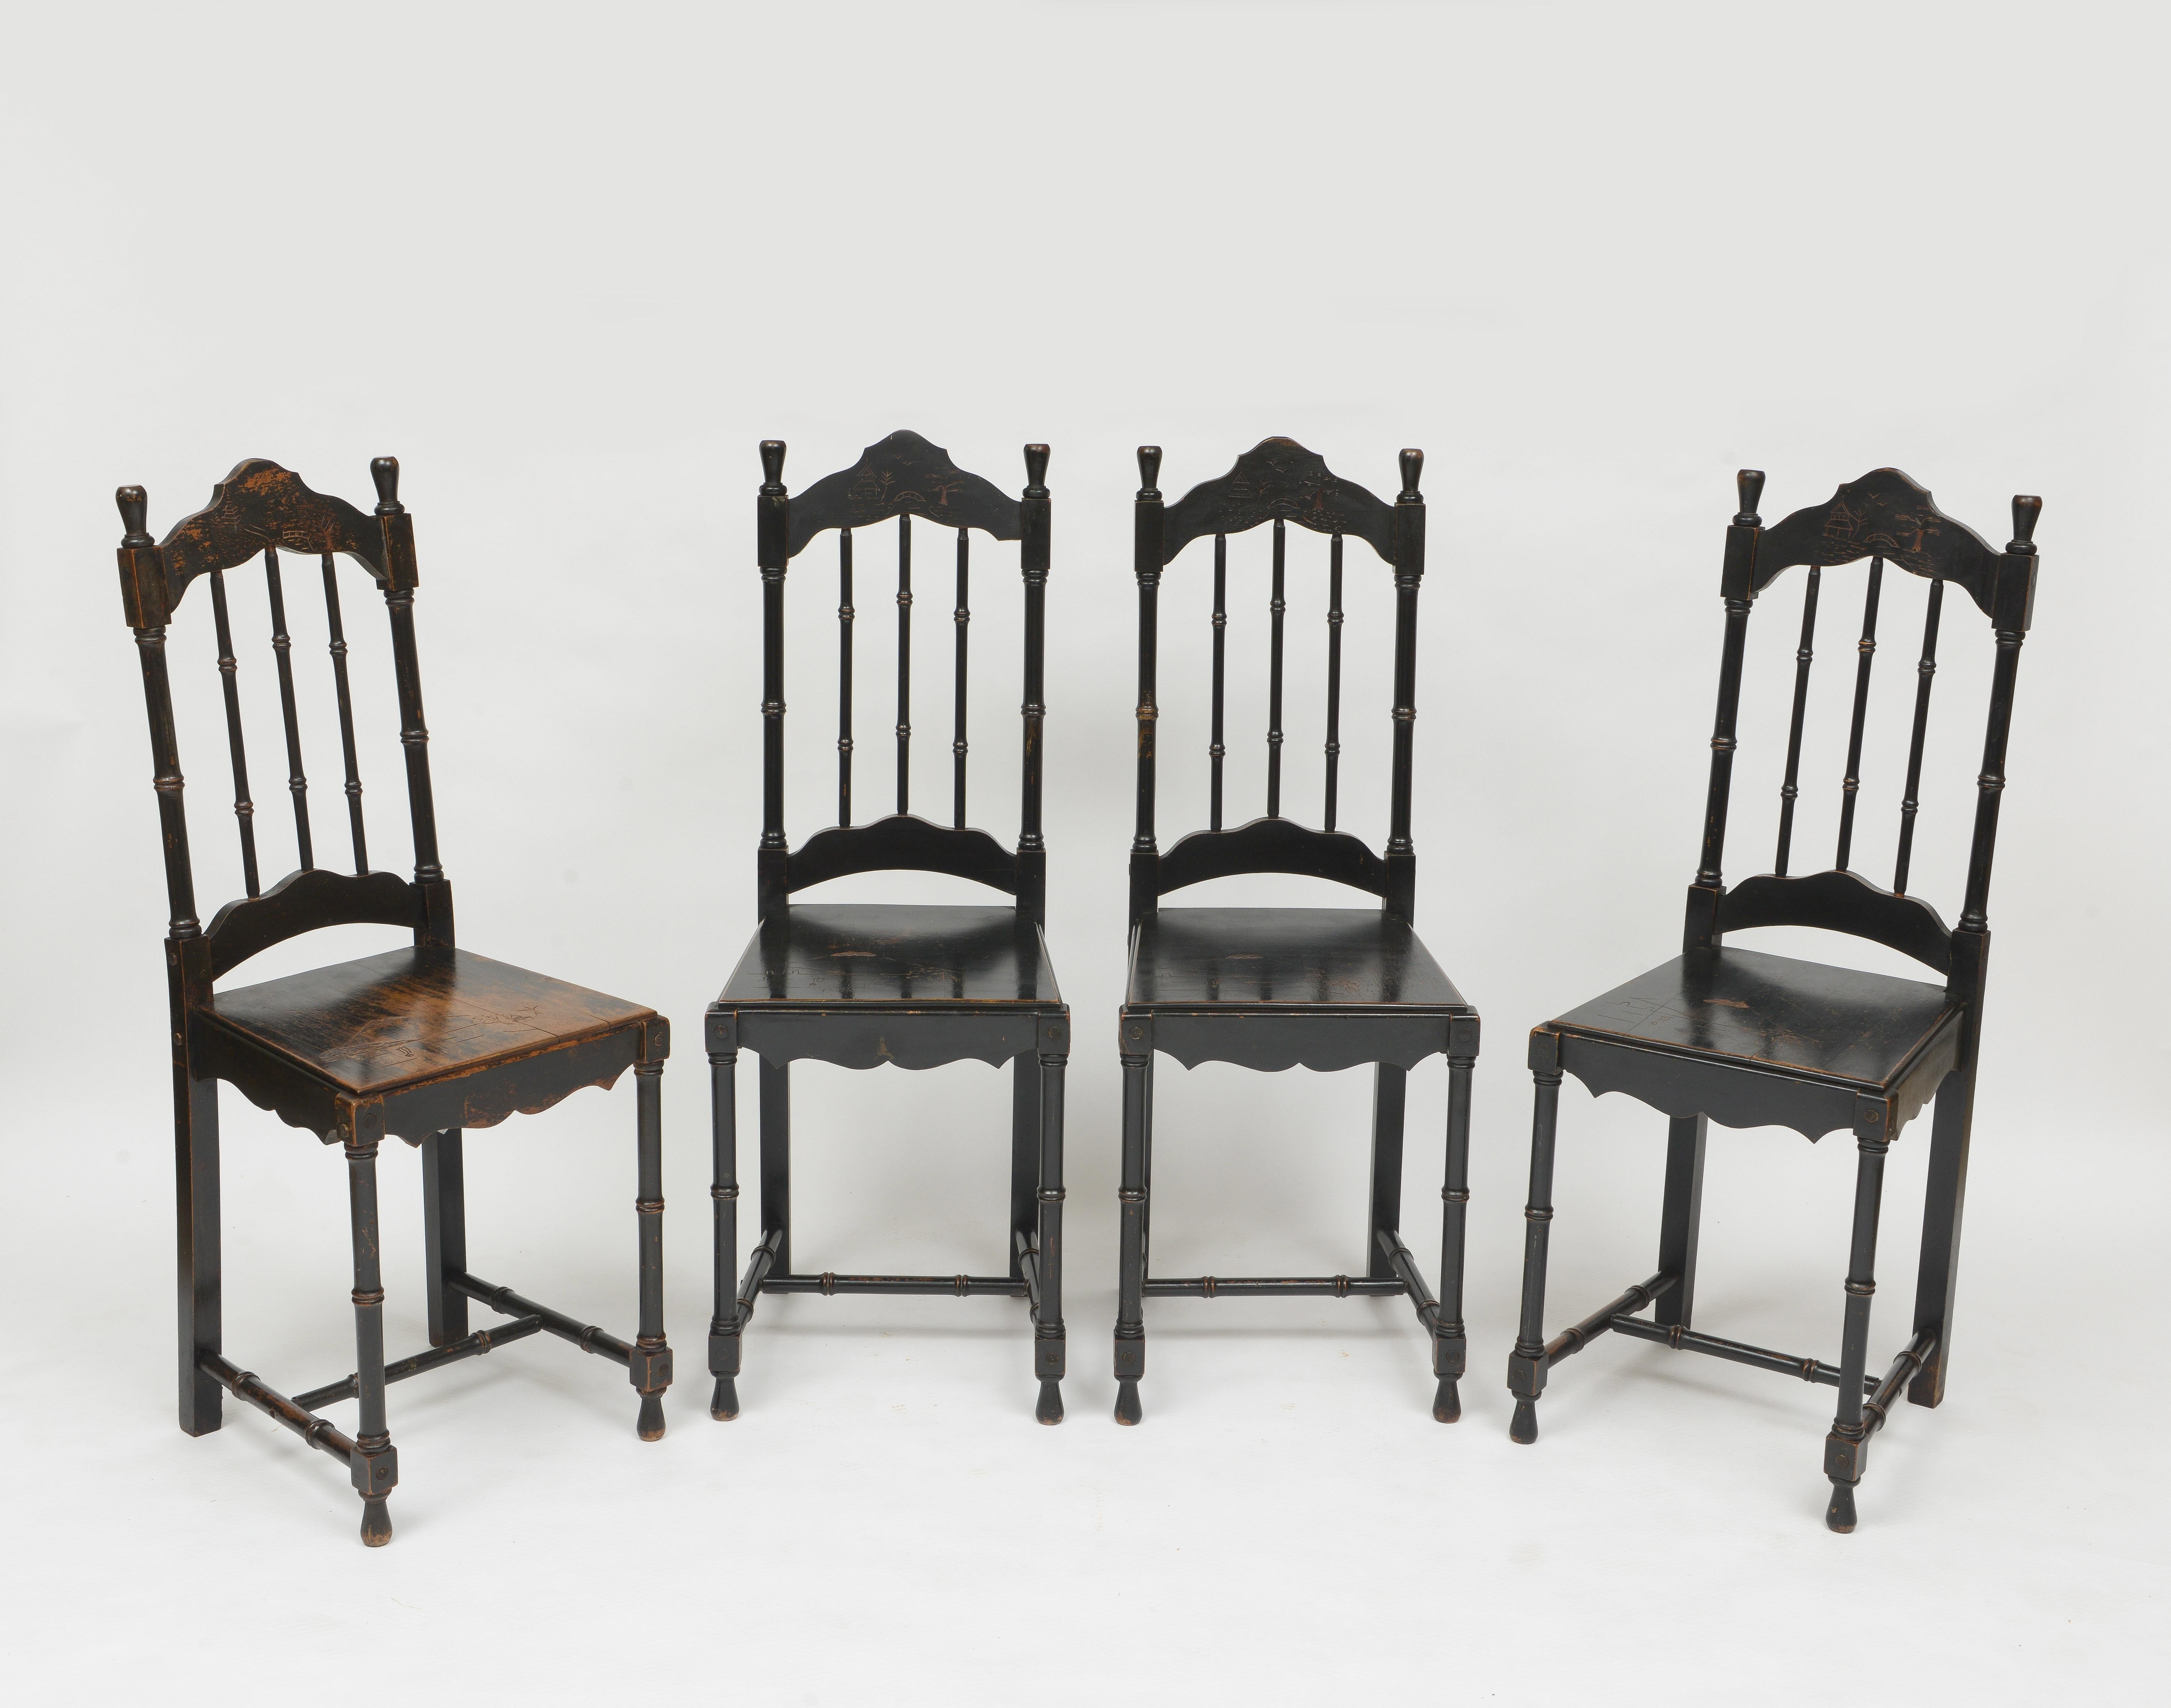 Hand-Crafted Late 19th Century Japanese Tea Table With Four Chairs - Set of 5 For Sale